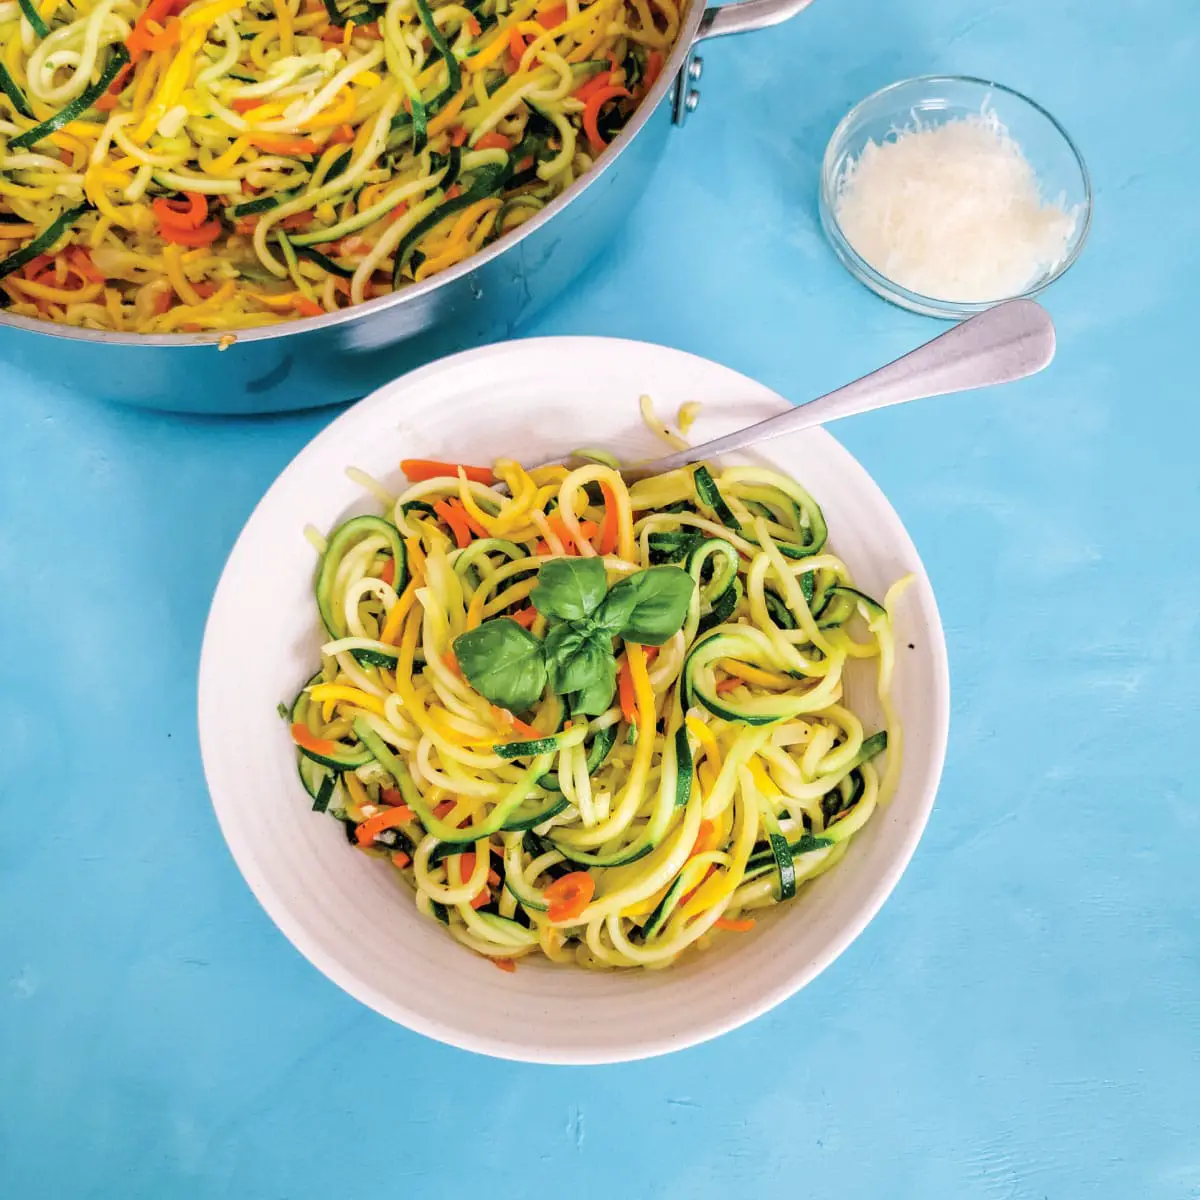 Carrot, squash and zucchini noodles cooked in a garlic sauce in a serving bowl ready to eat